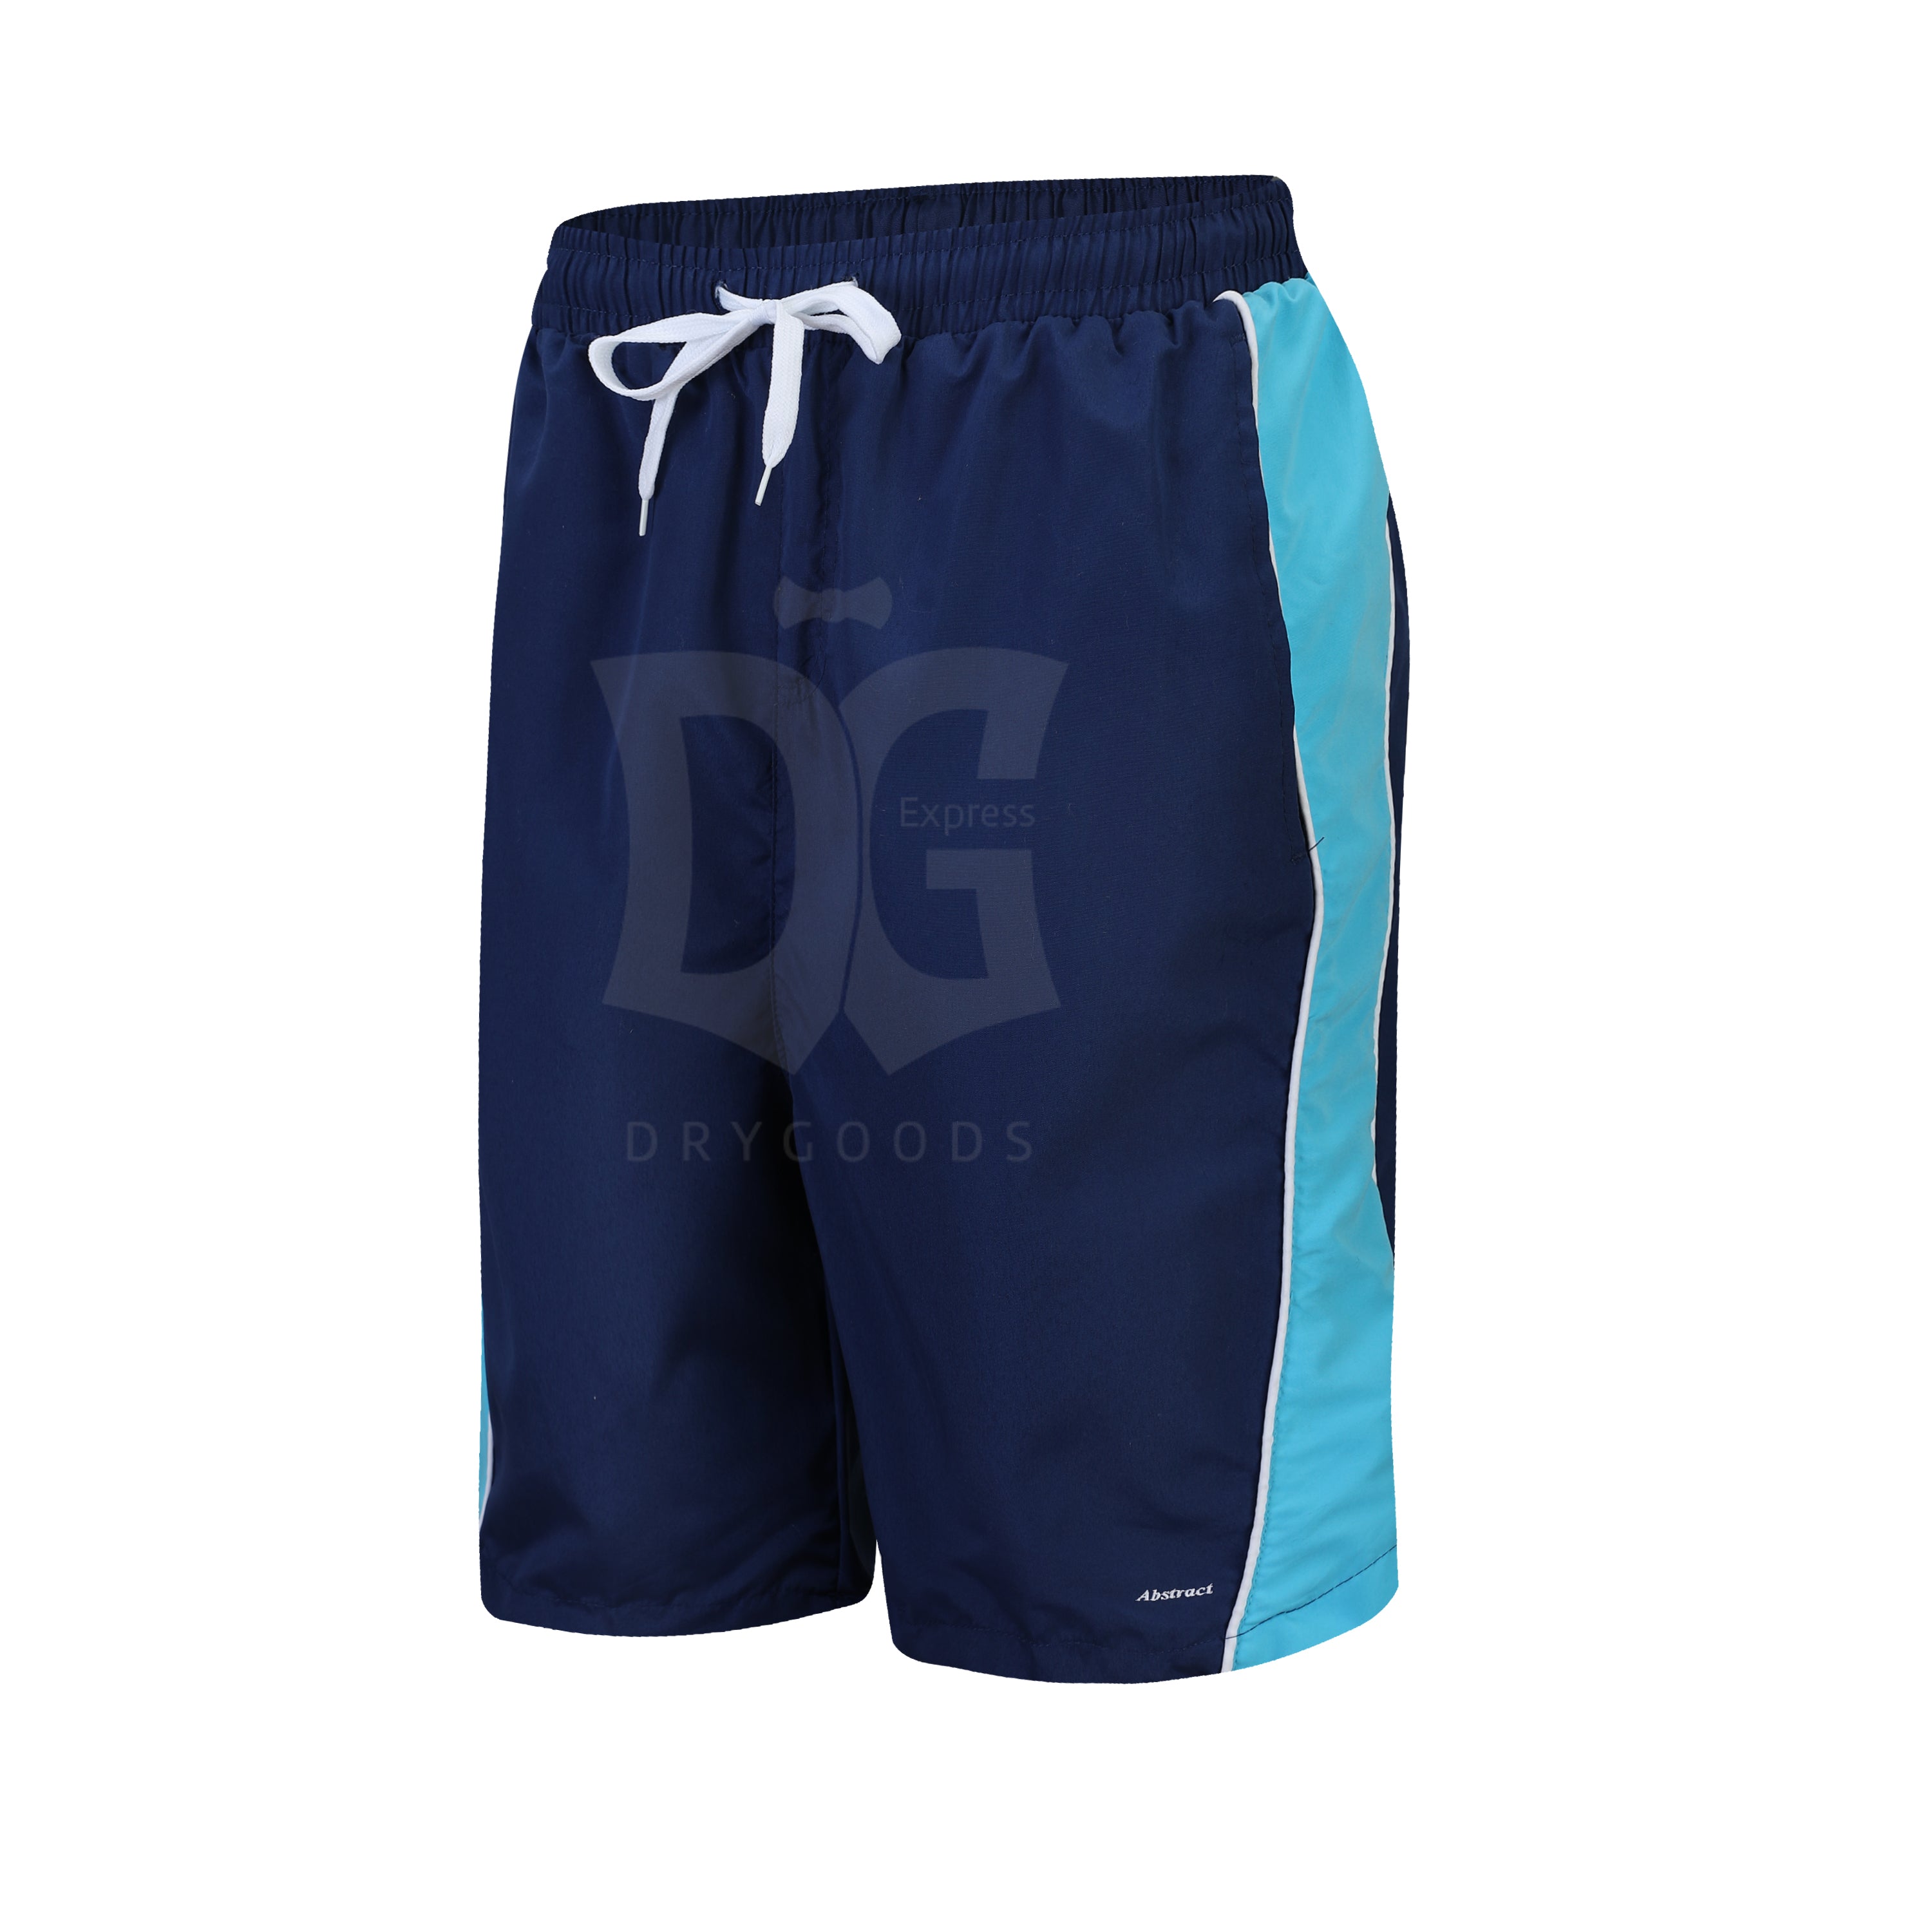 Abstract Boy's Lt. Blue Bathing Suits